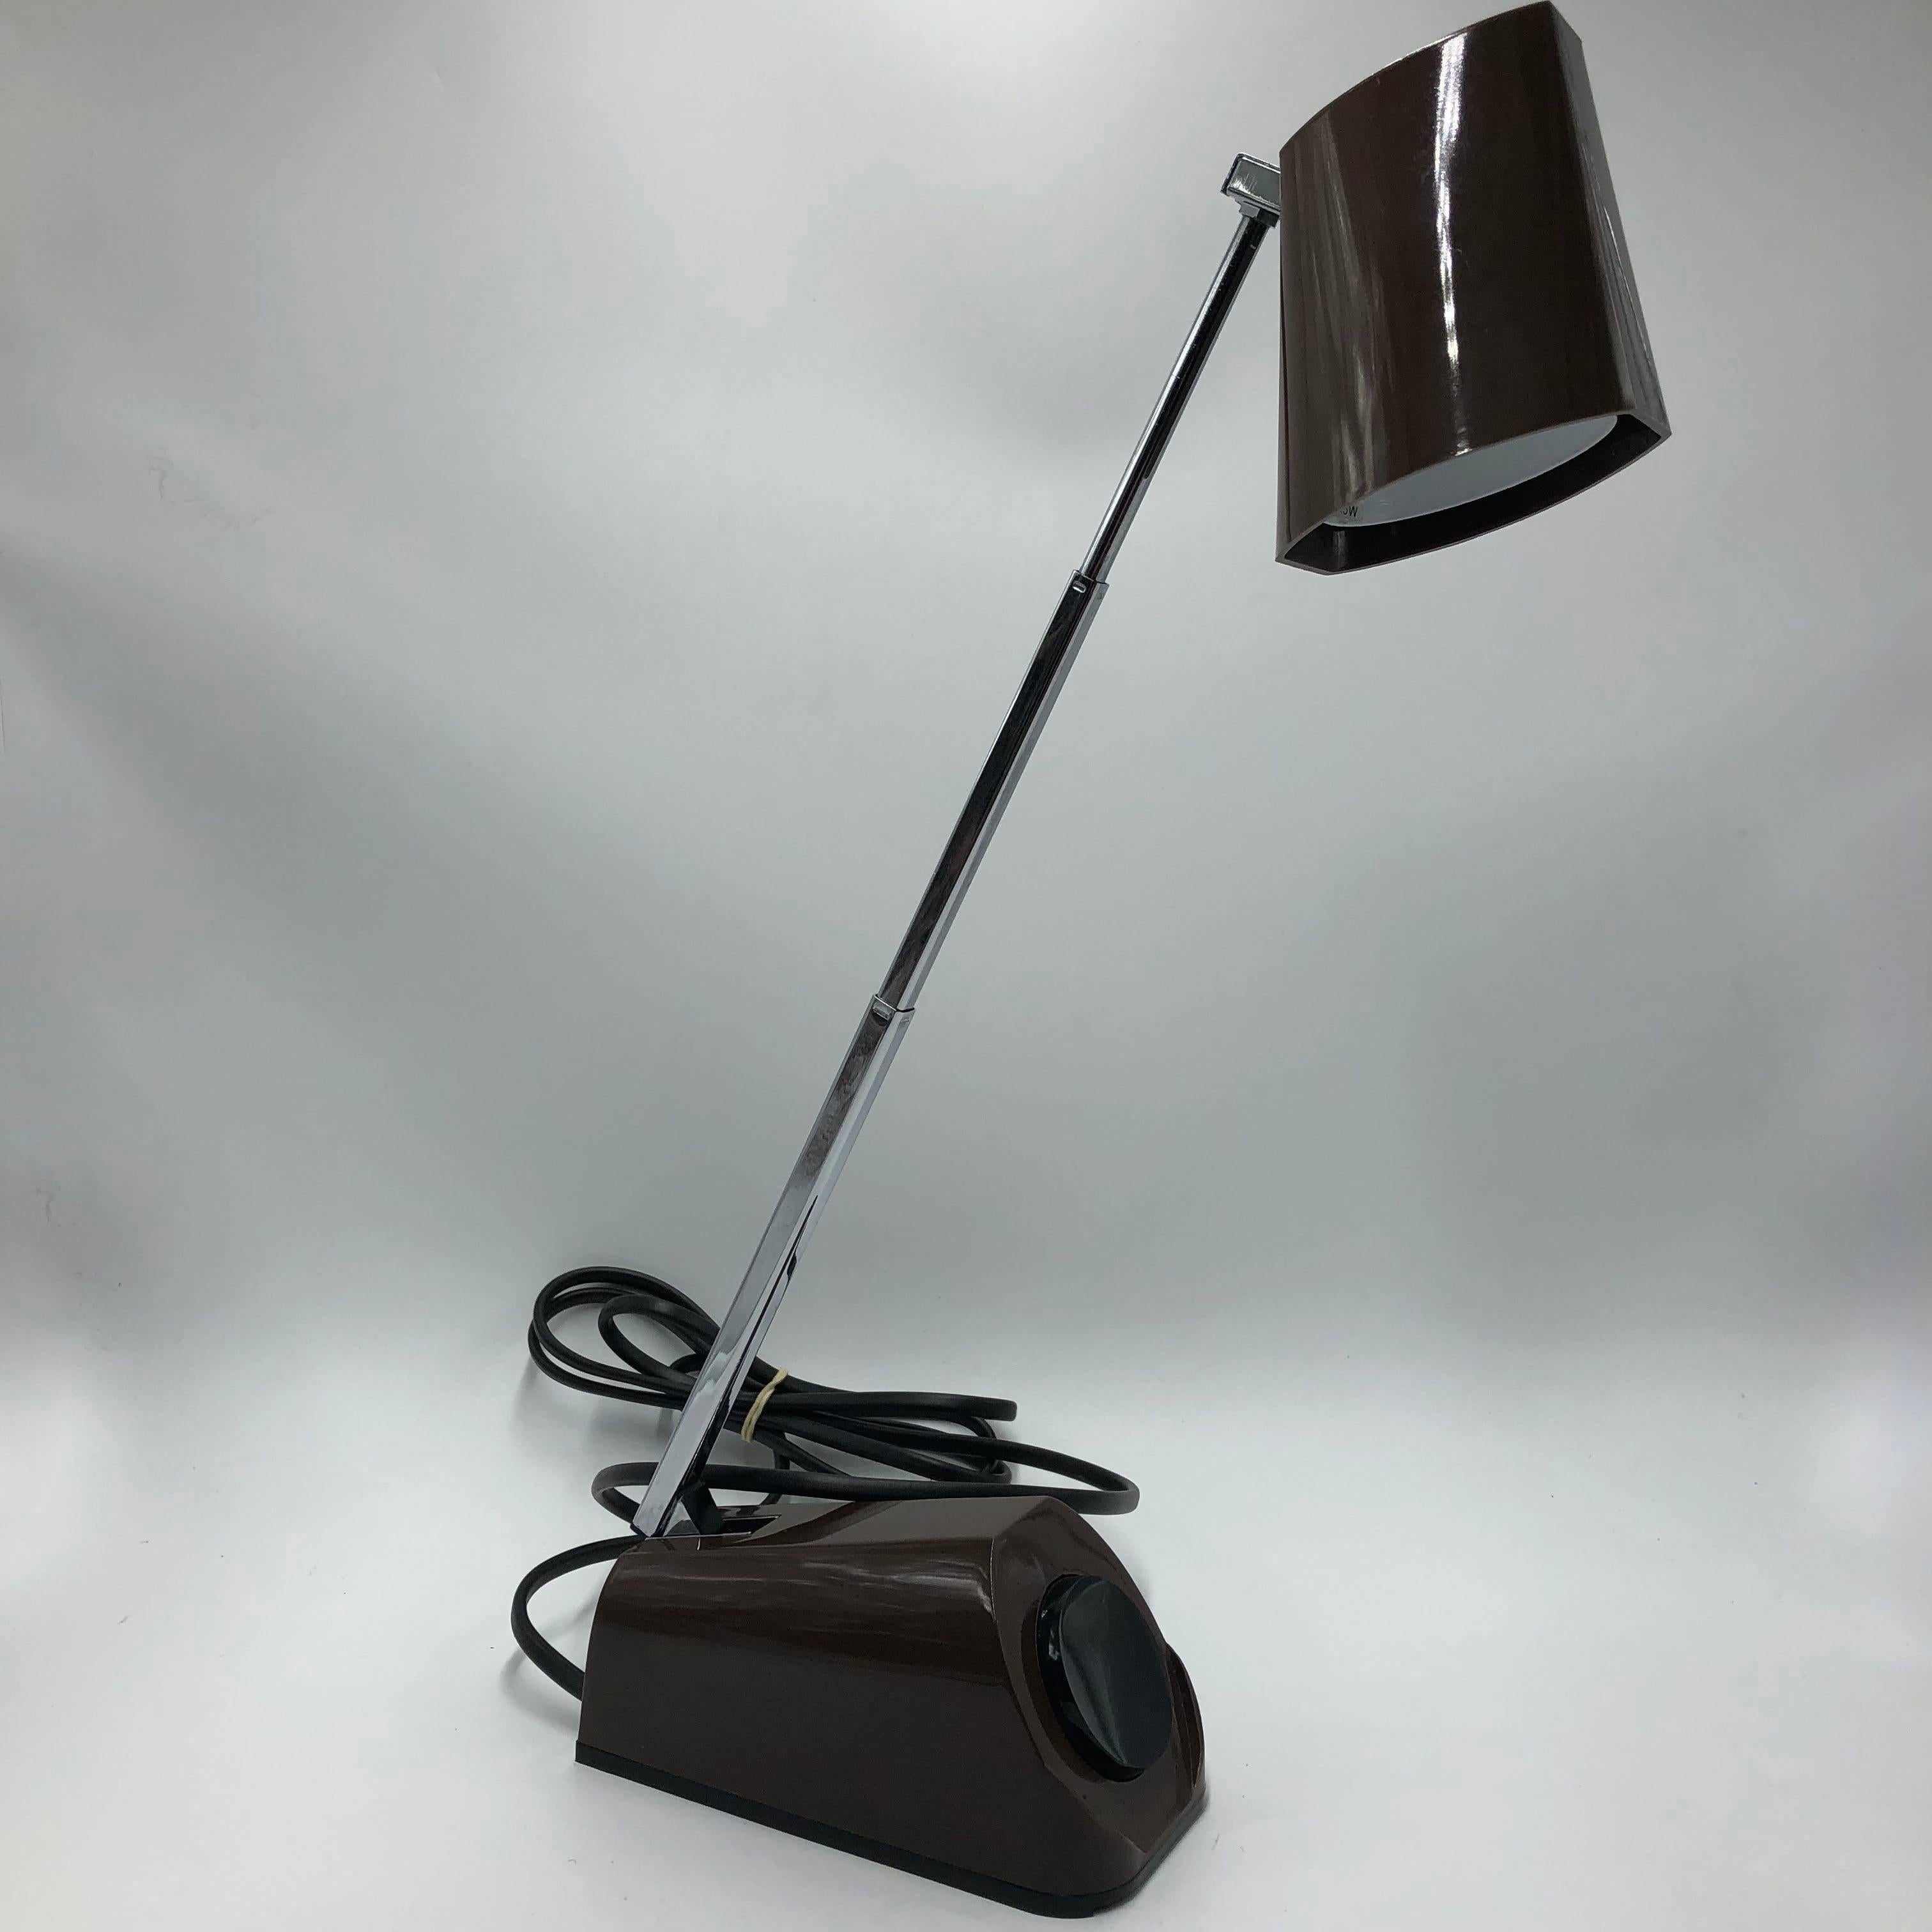 HBH MINI table lamp or desk light by H. Bødtcher-Hansen. Design Panton Fog & Mørup.
This table/wall lamp is made up by a base with a large black on/off button, a chrome telescopic extending arm and adjustable head. As a bonus feature – the light